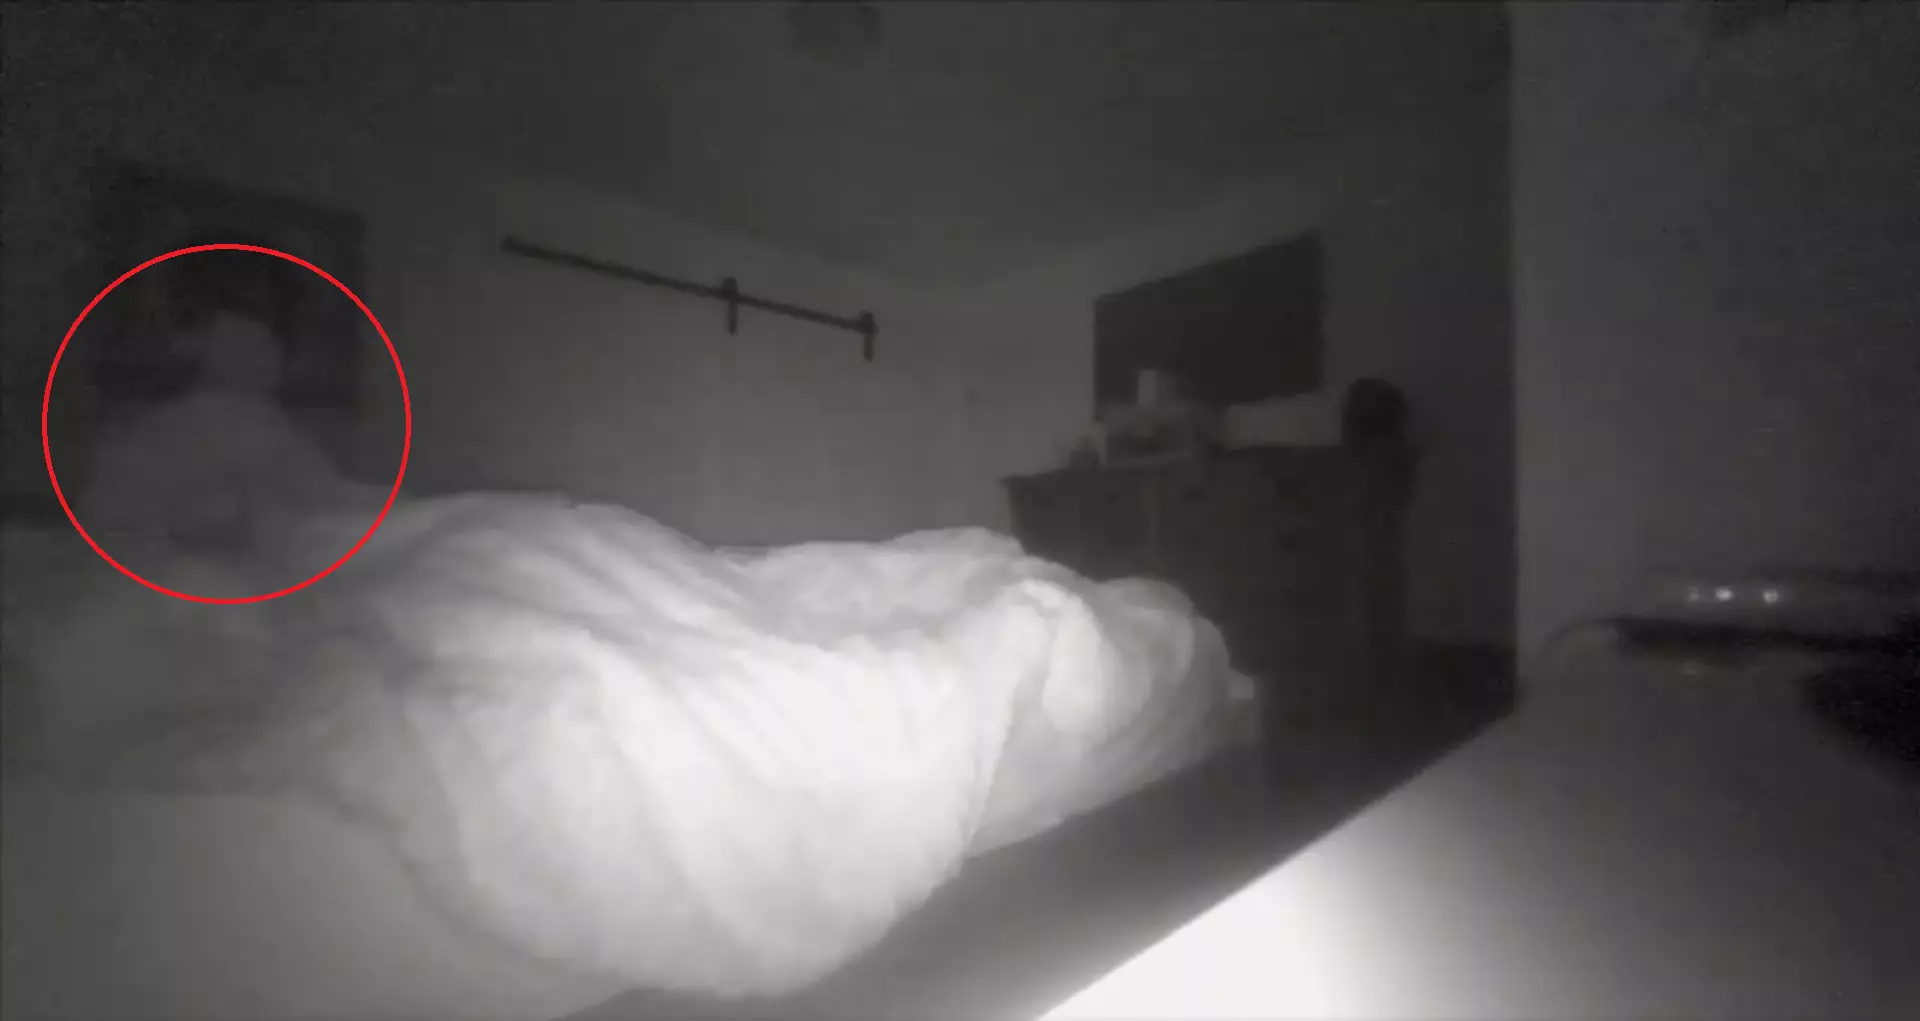 Paranormal Activity eat your heart out.